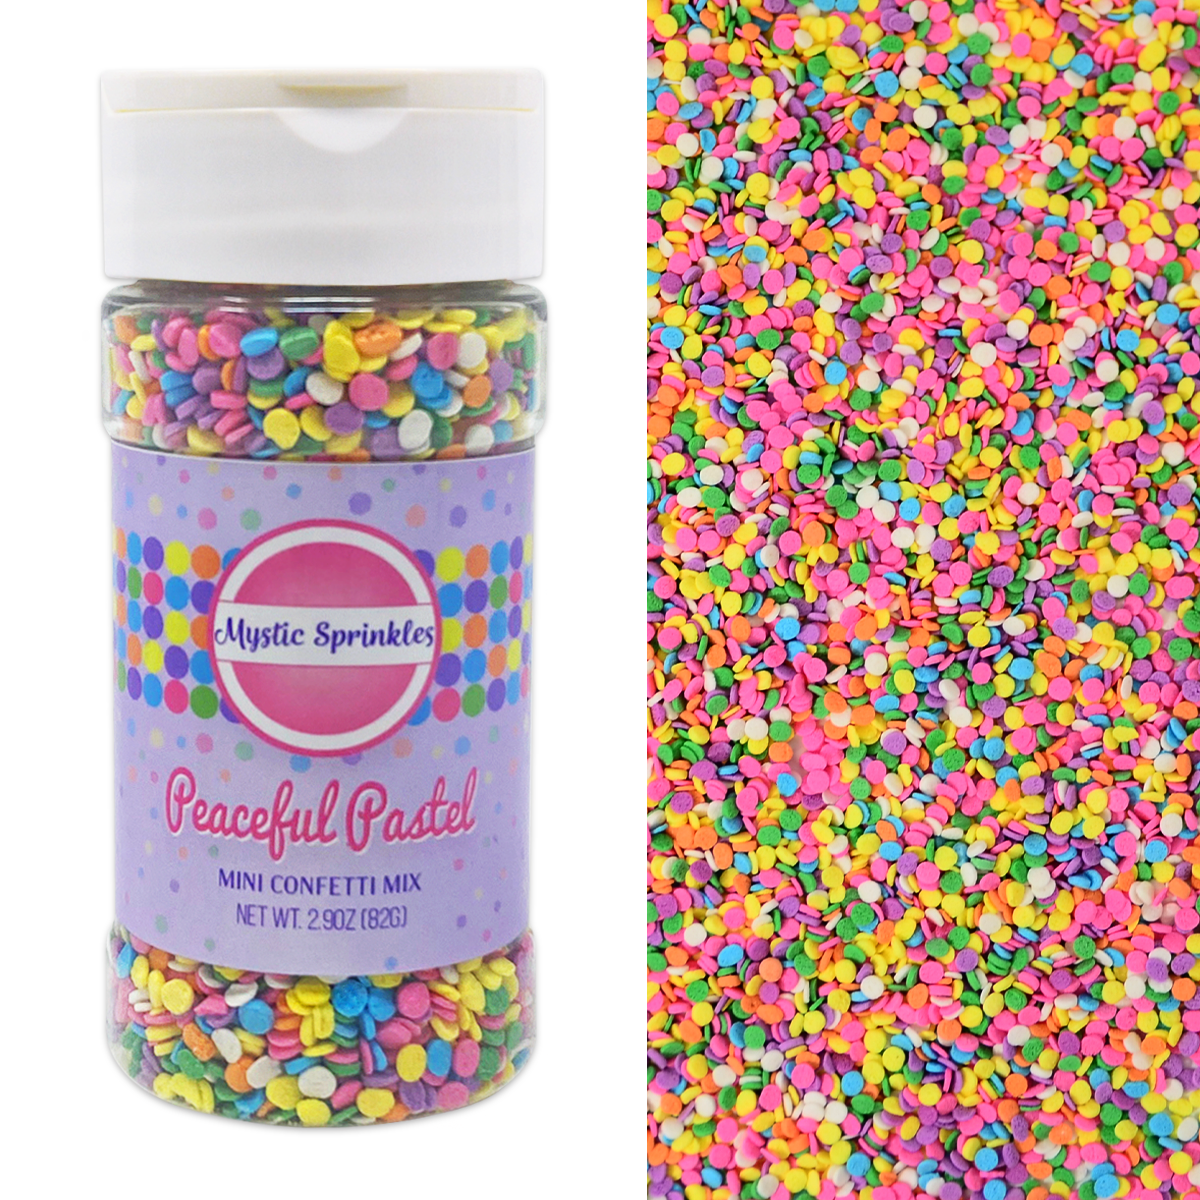 Load image into Gallery viewer, Peaceful Pastel Mini Confetti Mix 2.9oz Bottle
